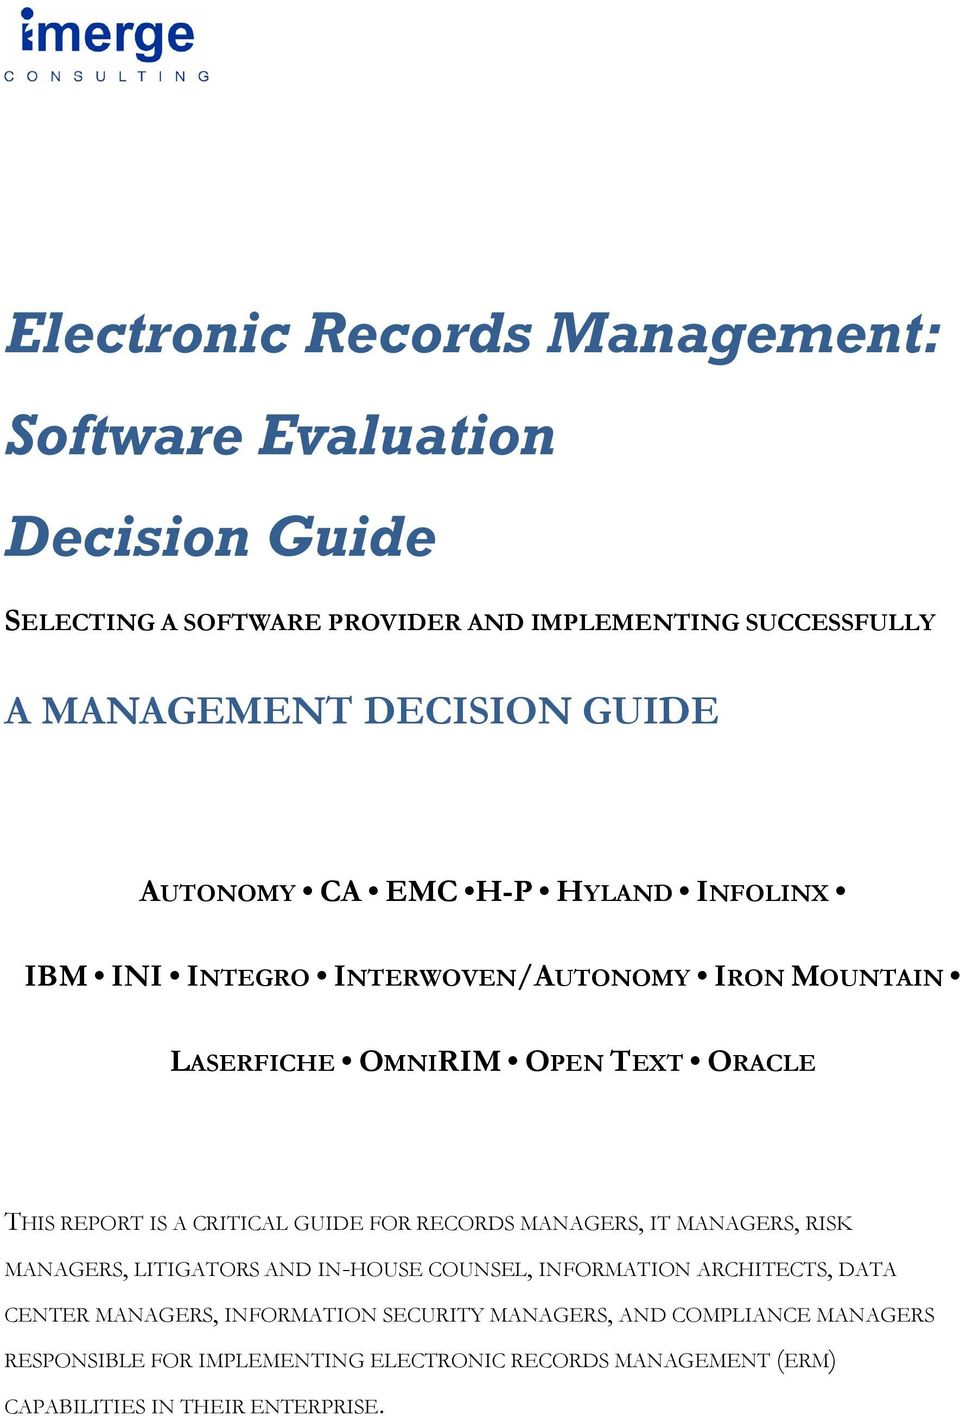 CRITICAL GUIDE FOR RECORDS MANAGERS, IT MANAGERS, RISK MANAGERS, LITIGATORS AND IN-HOUSE COUNSEL, INFORMATION ARCHITECTS, DATA CENTER MANAGERS,